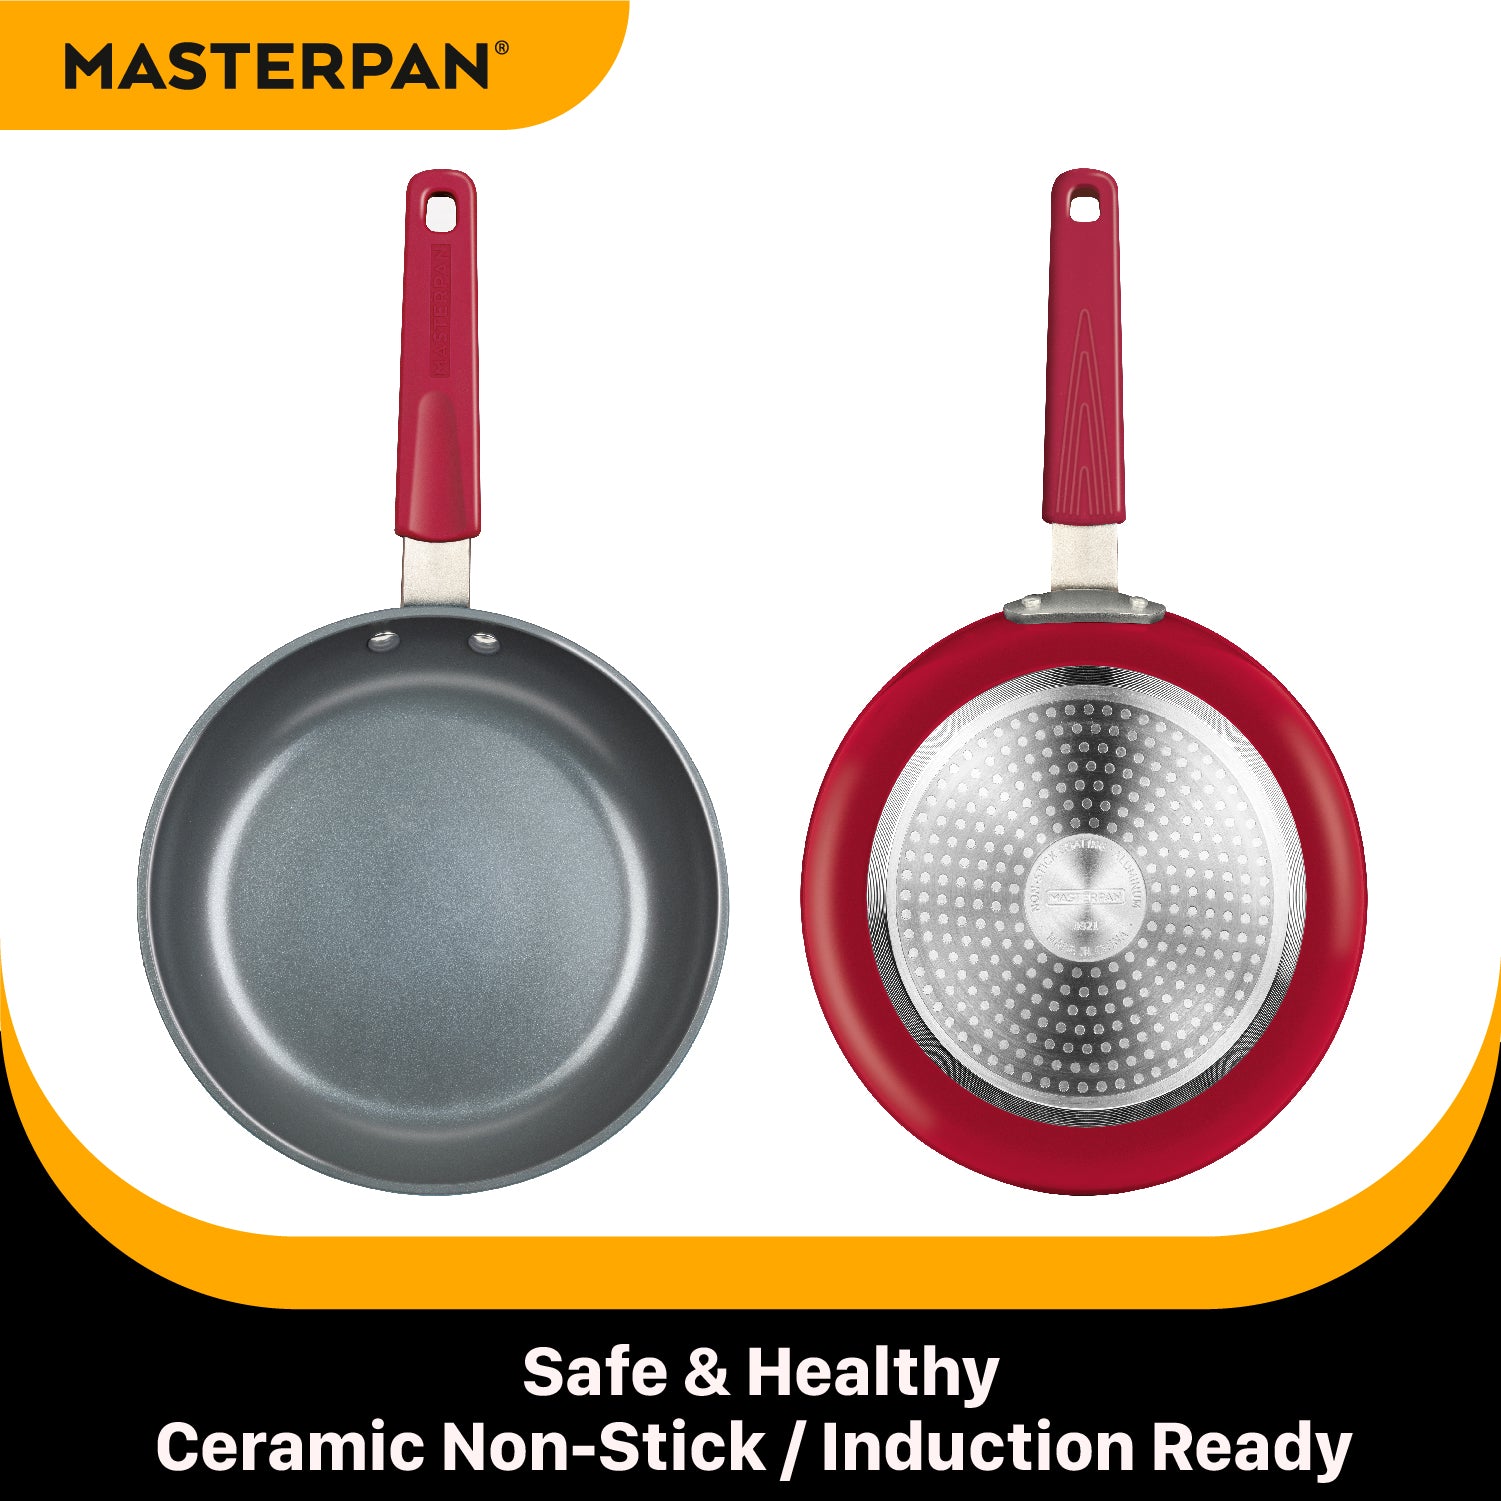 Stovetop Oven Fry Pan & Skillet With Heat-In Steam-Out Lid, Healthy Ceramic Non-Stick Aluminium With Stainless Steel Chef’s Handle, Bonus 2 Utensils And Felt Pan Protector Included, 9.5” (24Cm) - Beet (208C)